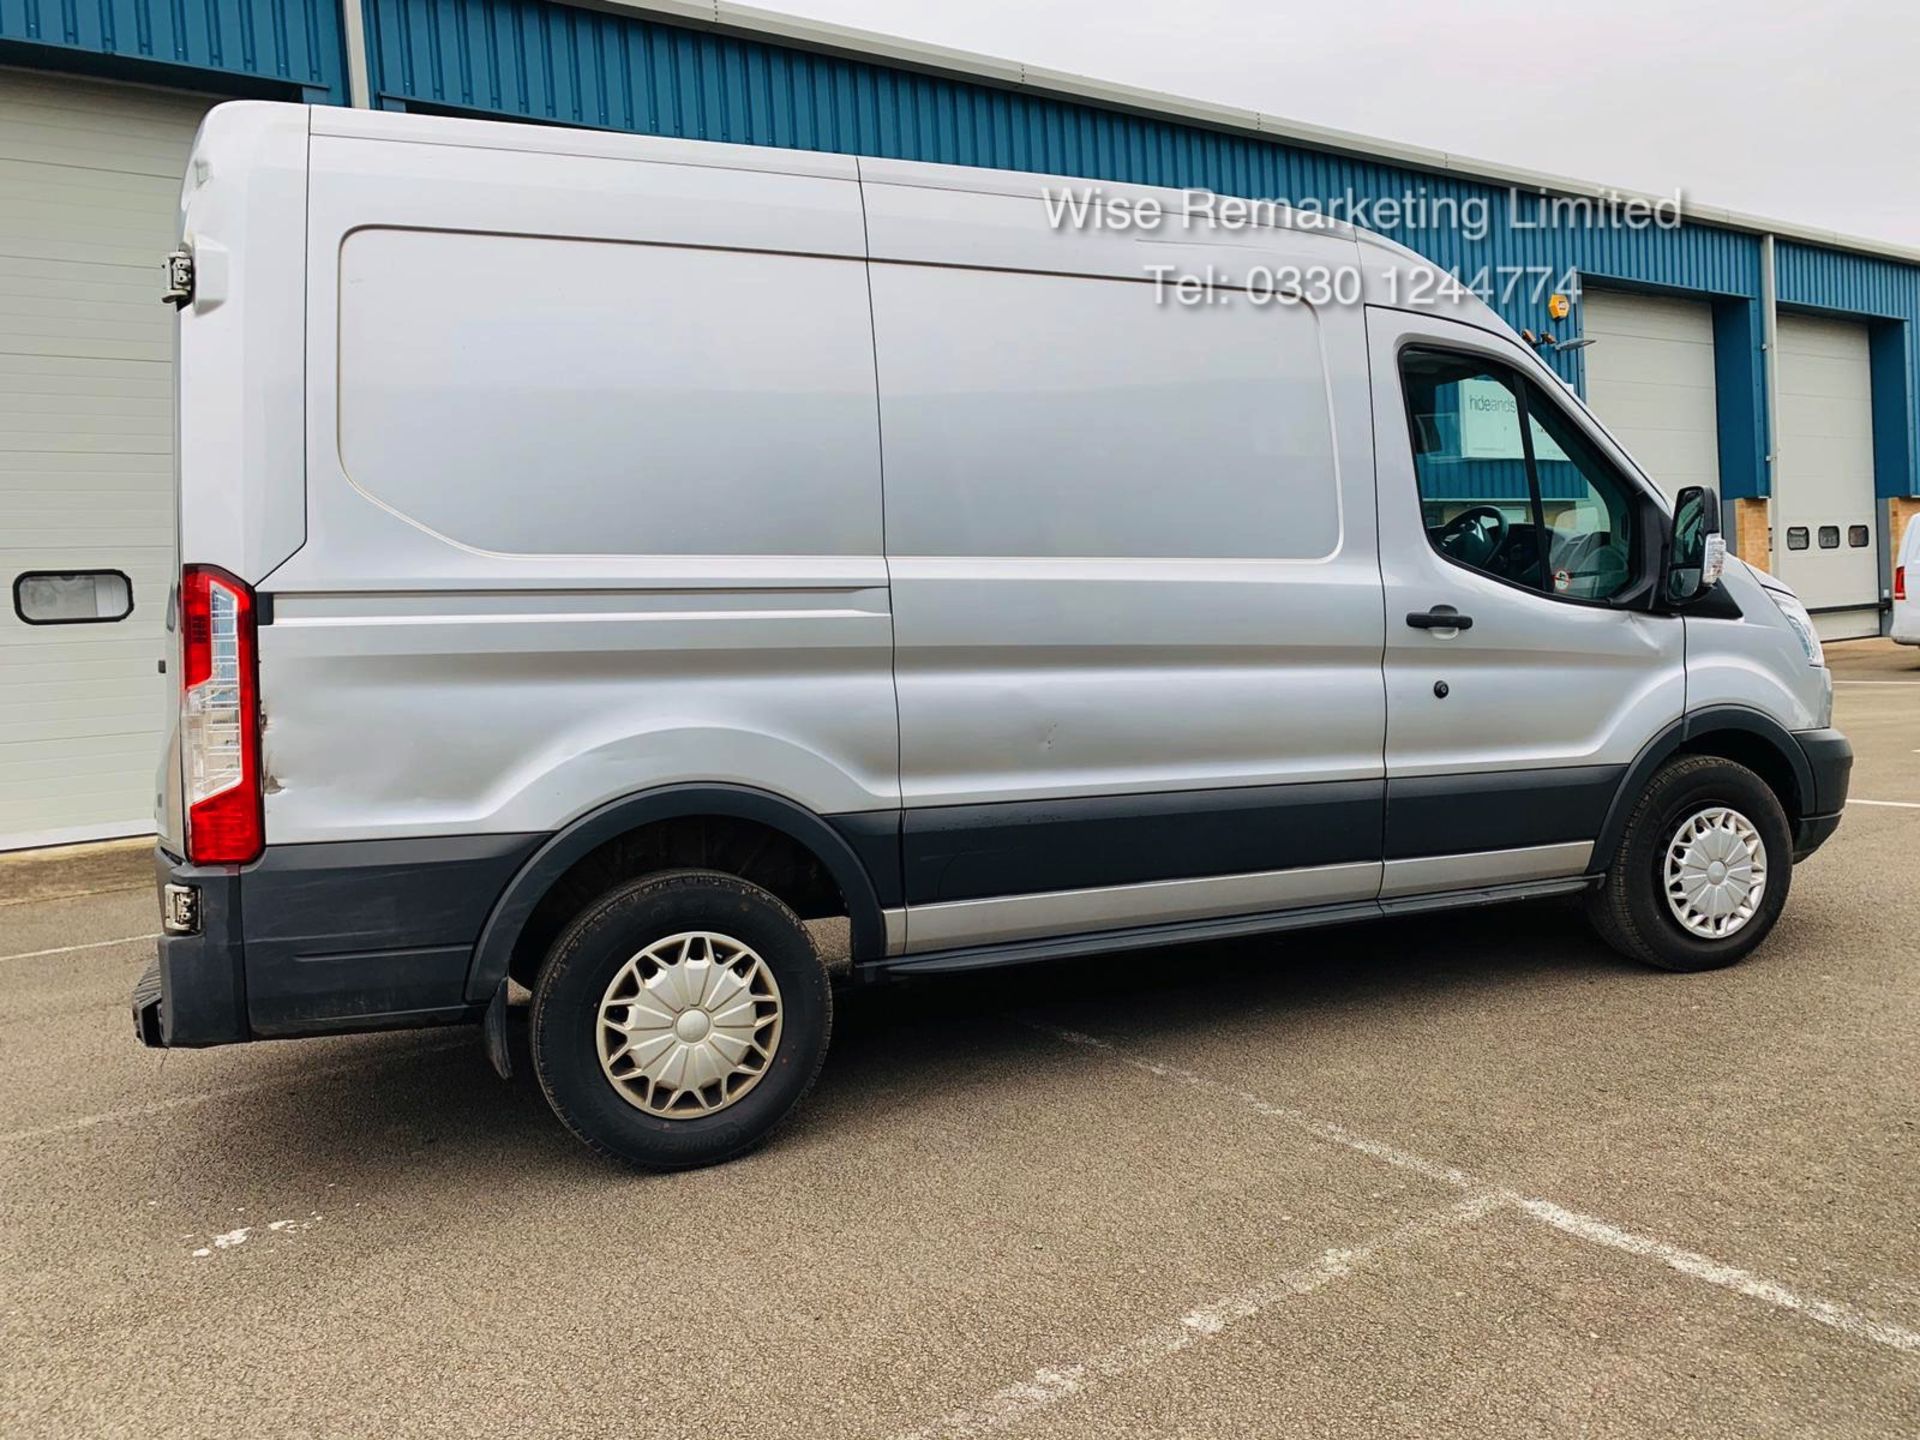 Ford Transit 350 2.2 TDCI Trend Van - 2015 Reg - Silver - 6 Speed - Ply Lined - Image 3 of 20